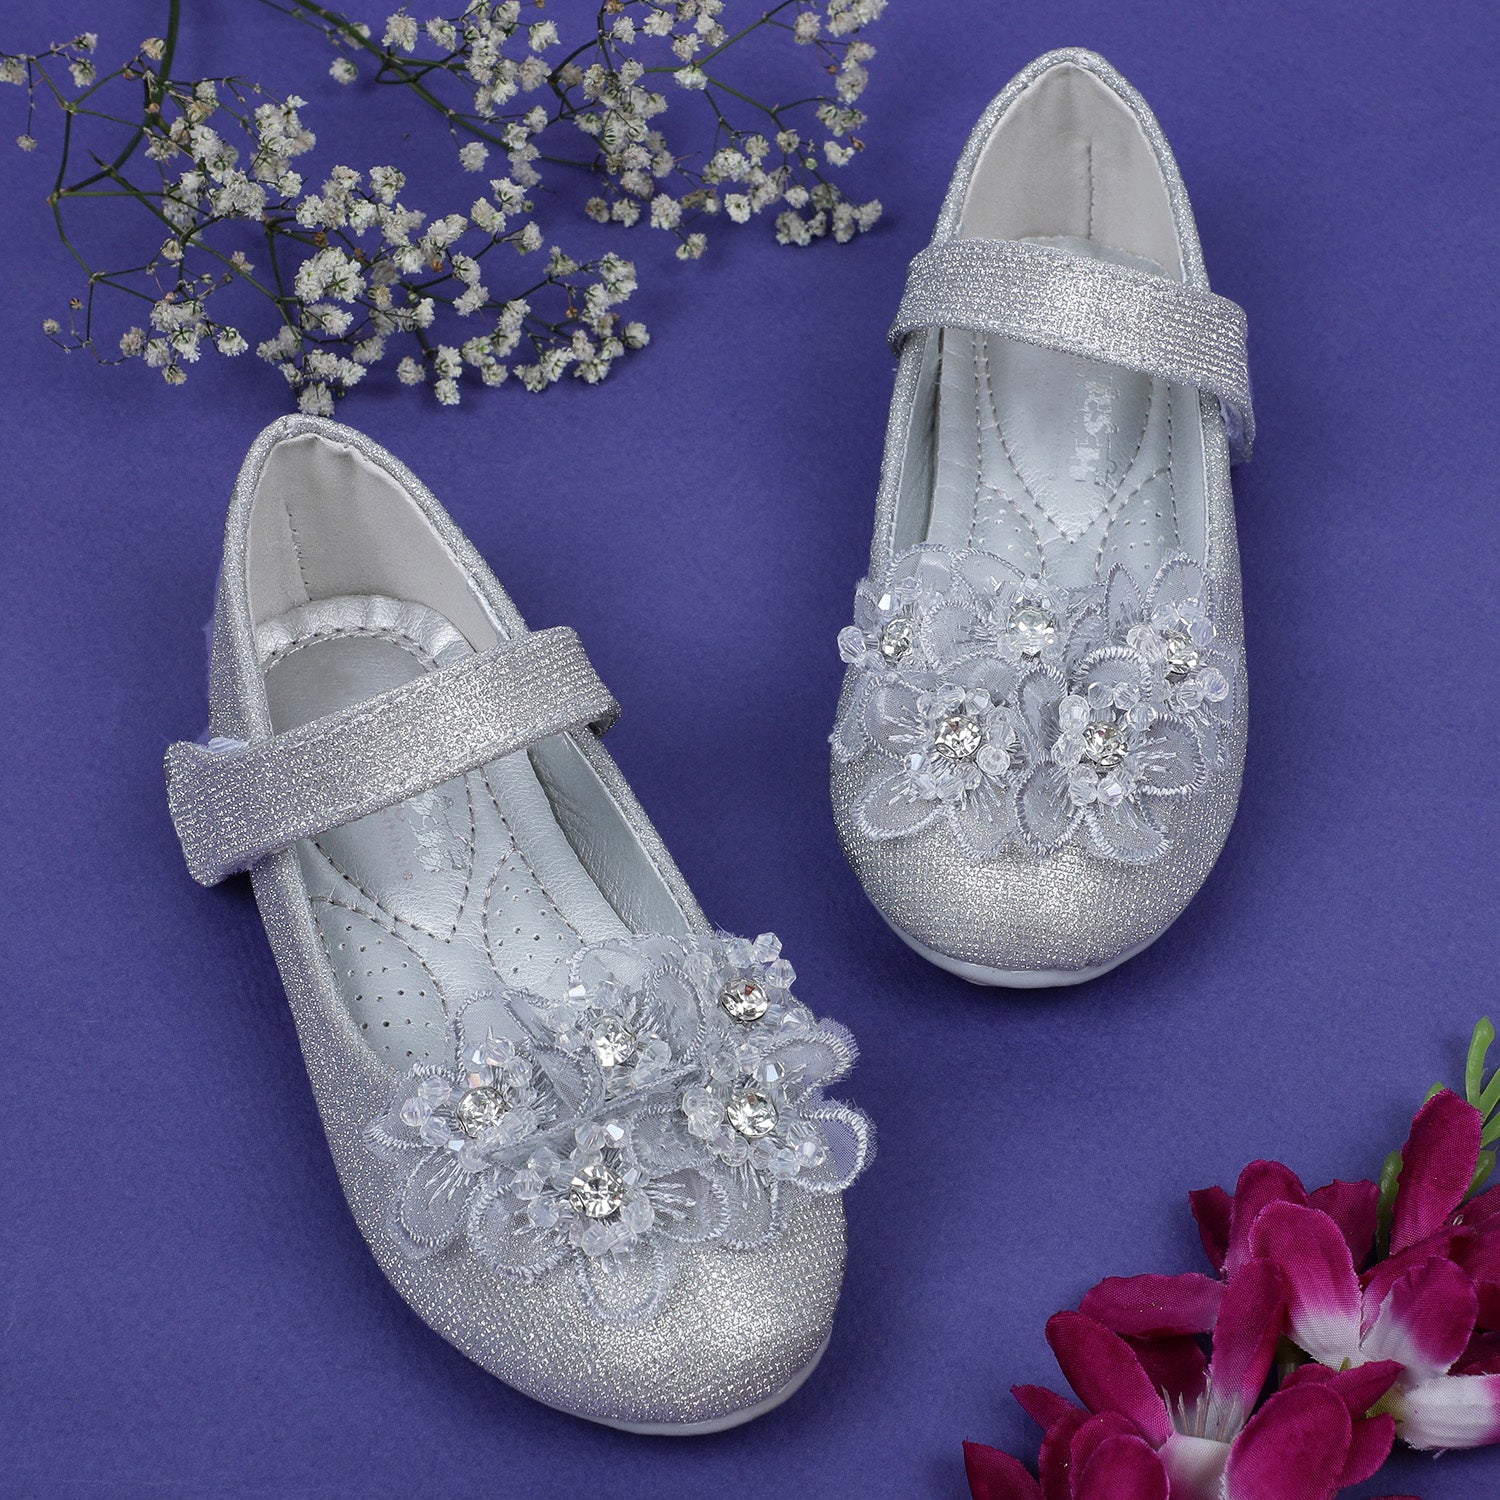 Baby Moo x Bash Kids Floral Embroidered Party Mary Jane Ballerinas - Silver